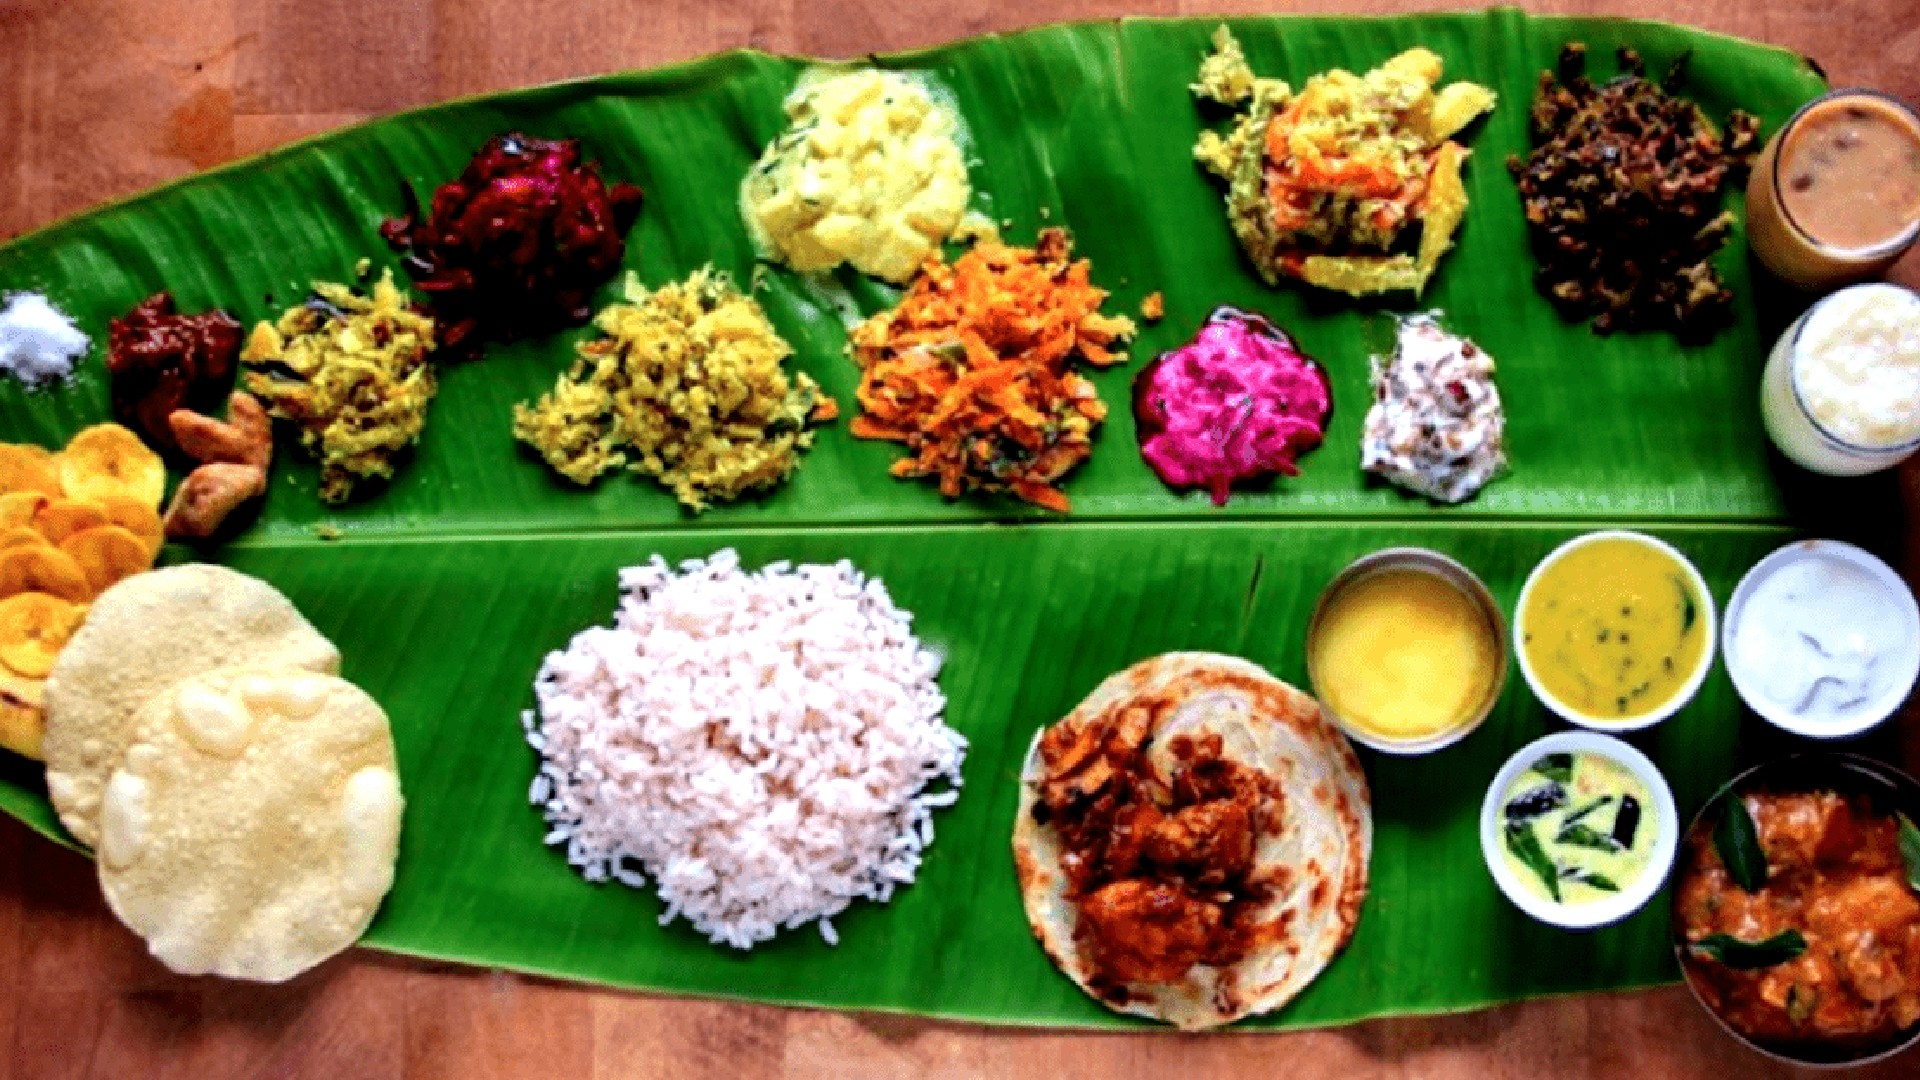 Are There Any Benefits Of Eating Food On A Banana Leaf?